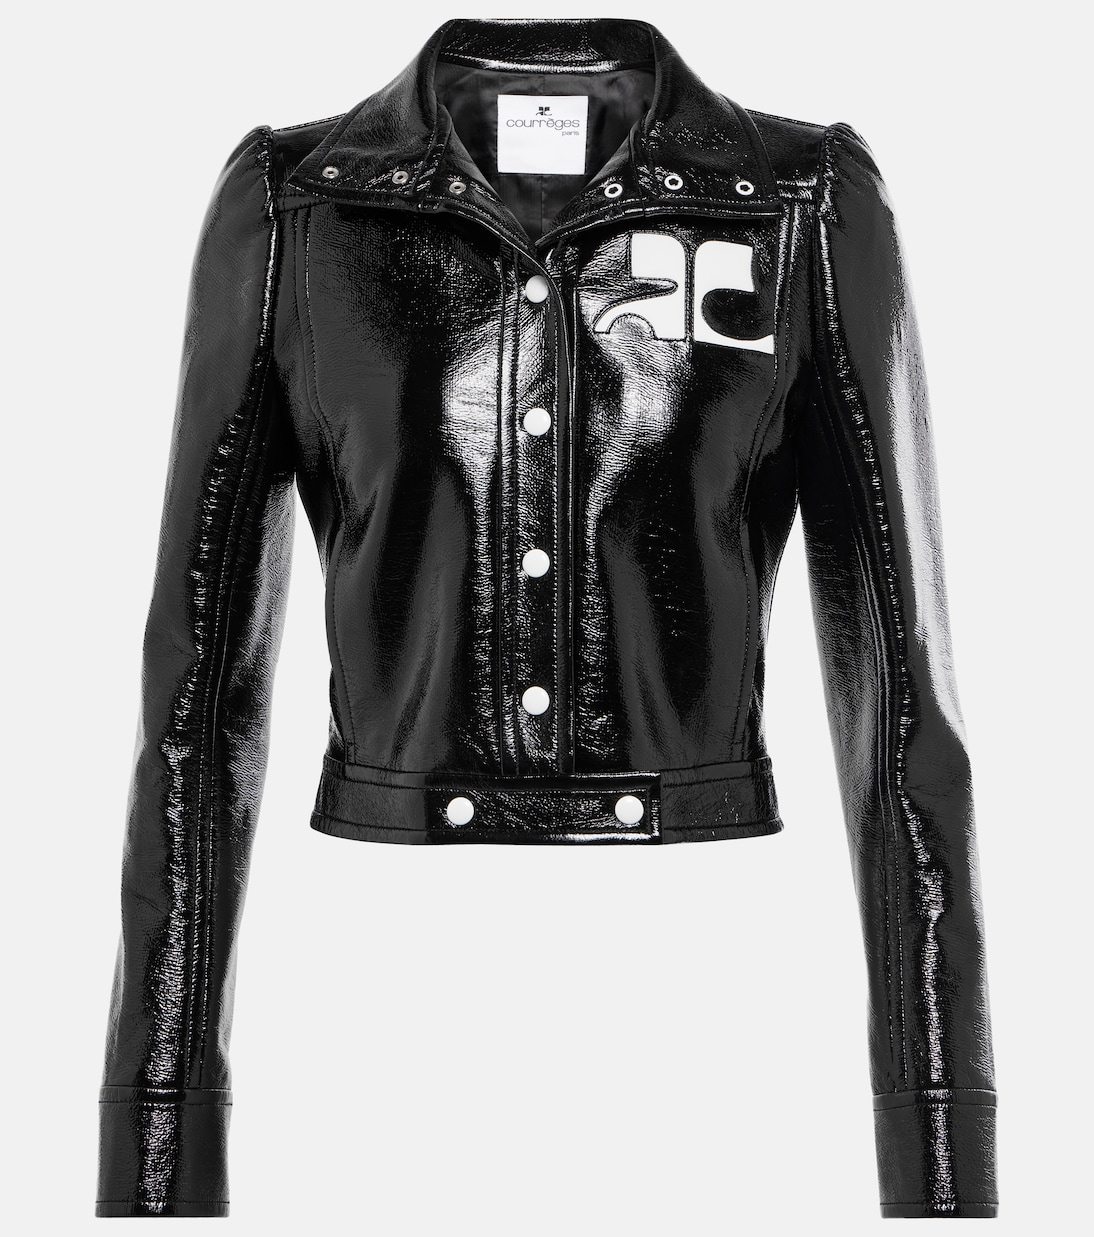 A black shiny leather jacket Description automatically generated